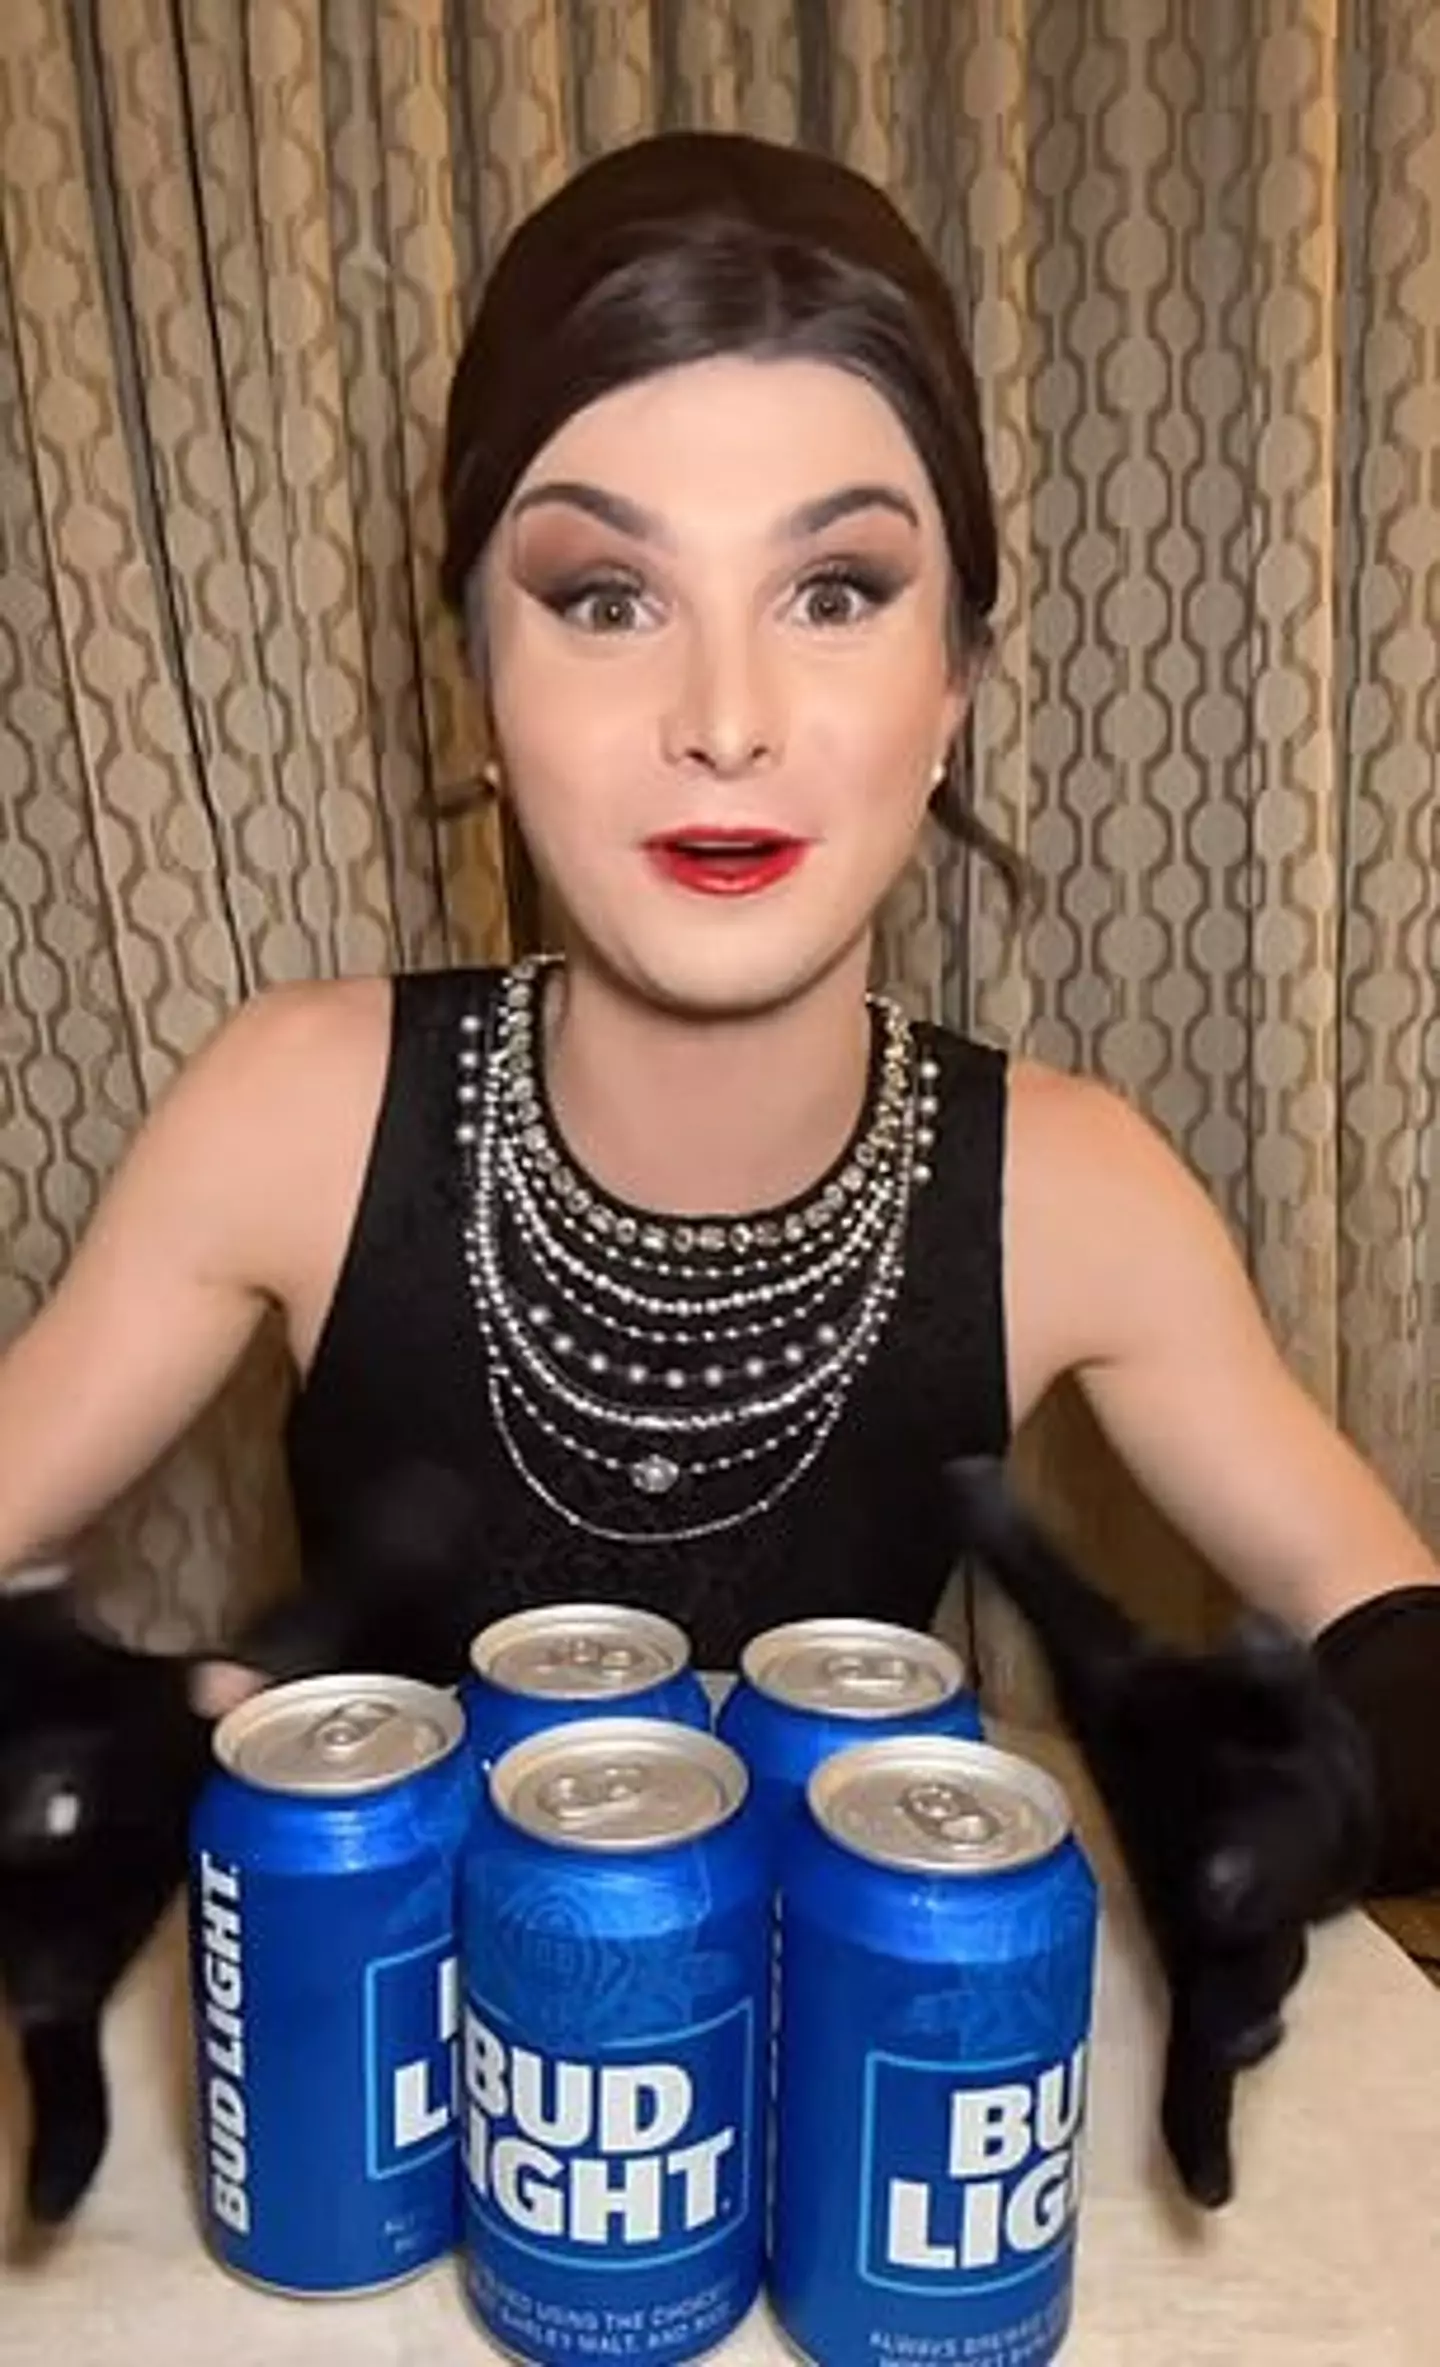 Dyaln Mulvaney with her cans of Bud Light in a video posted to social media.